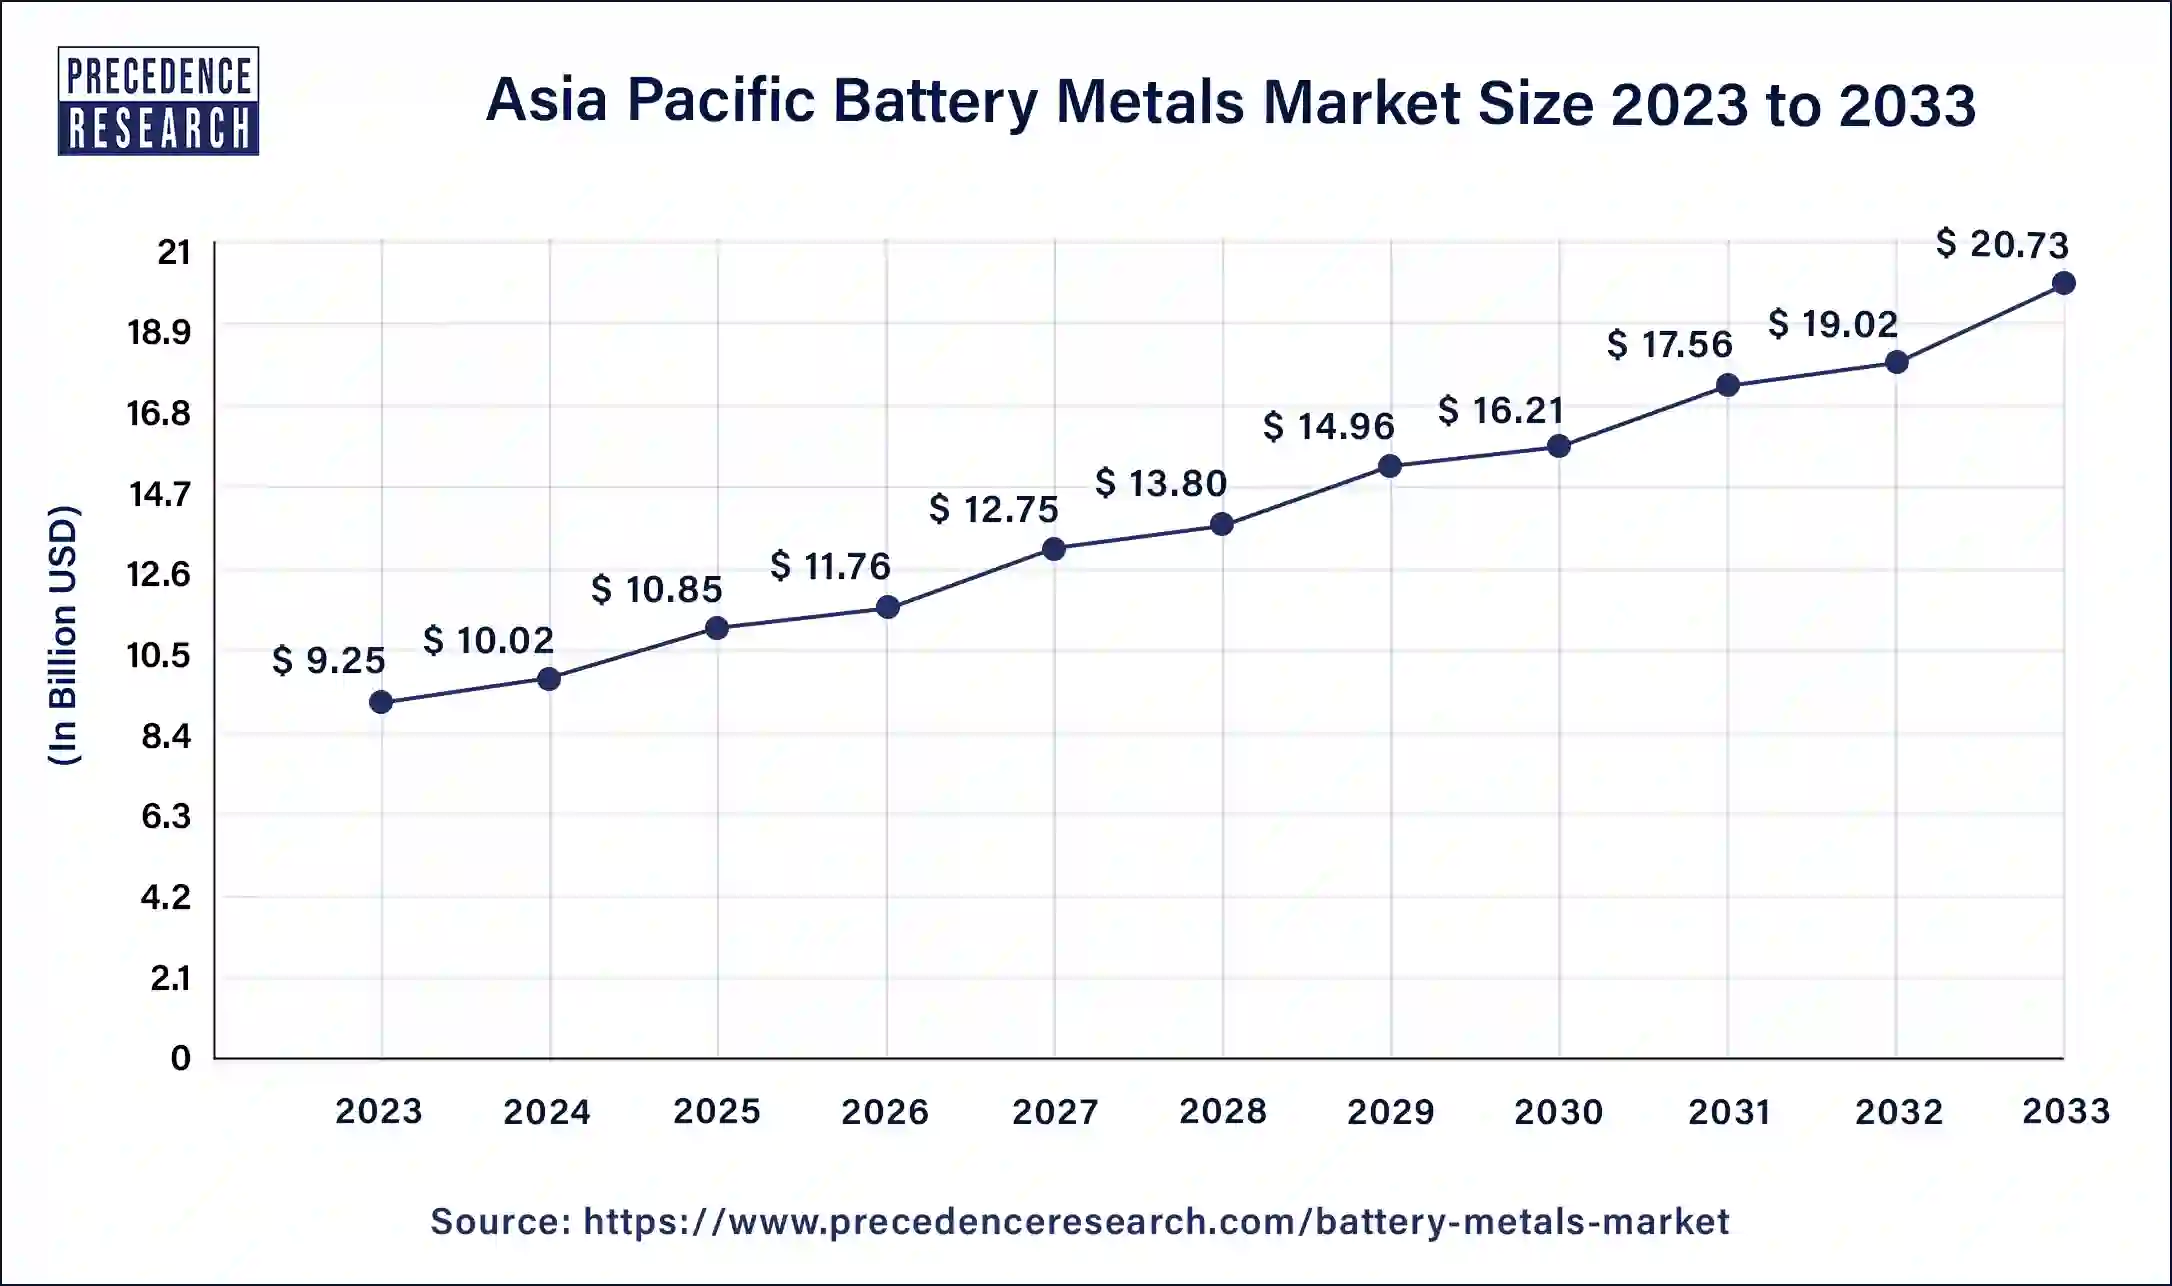 Asia Pacific Battery Metals Market Size 2024 to 2033